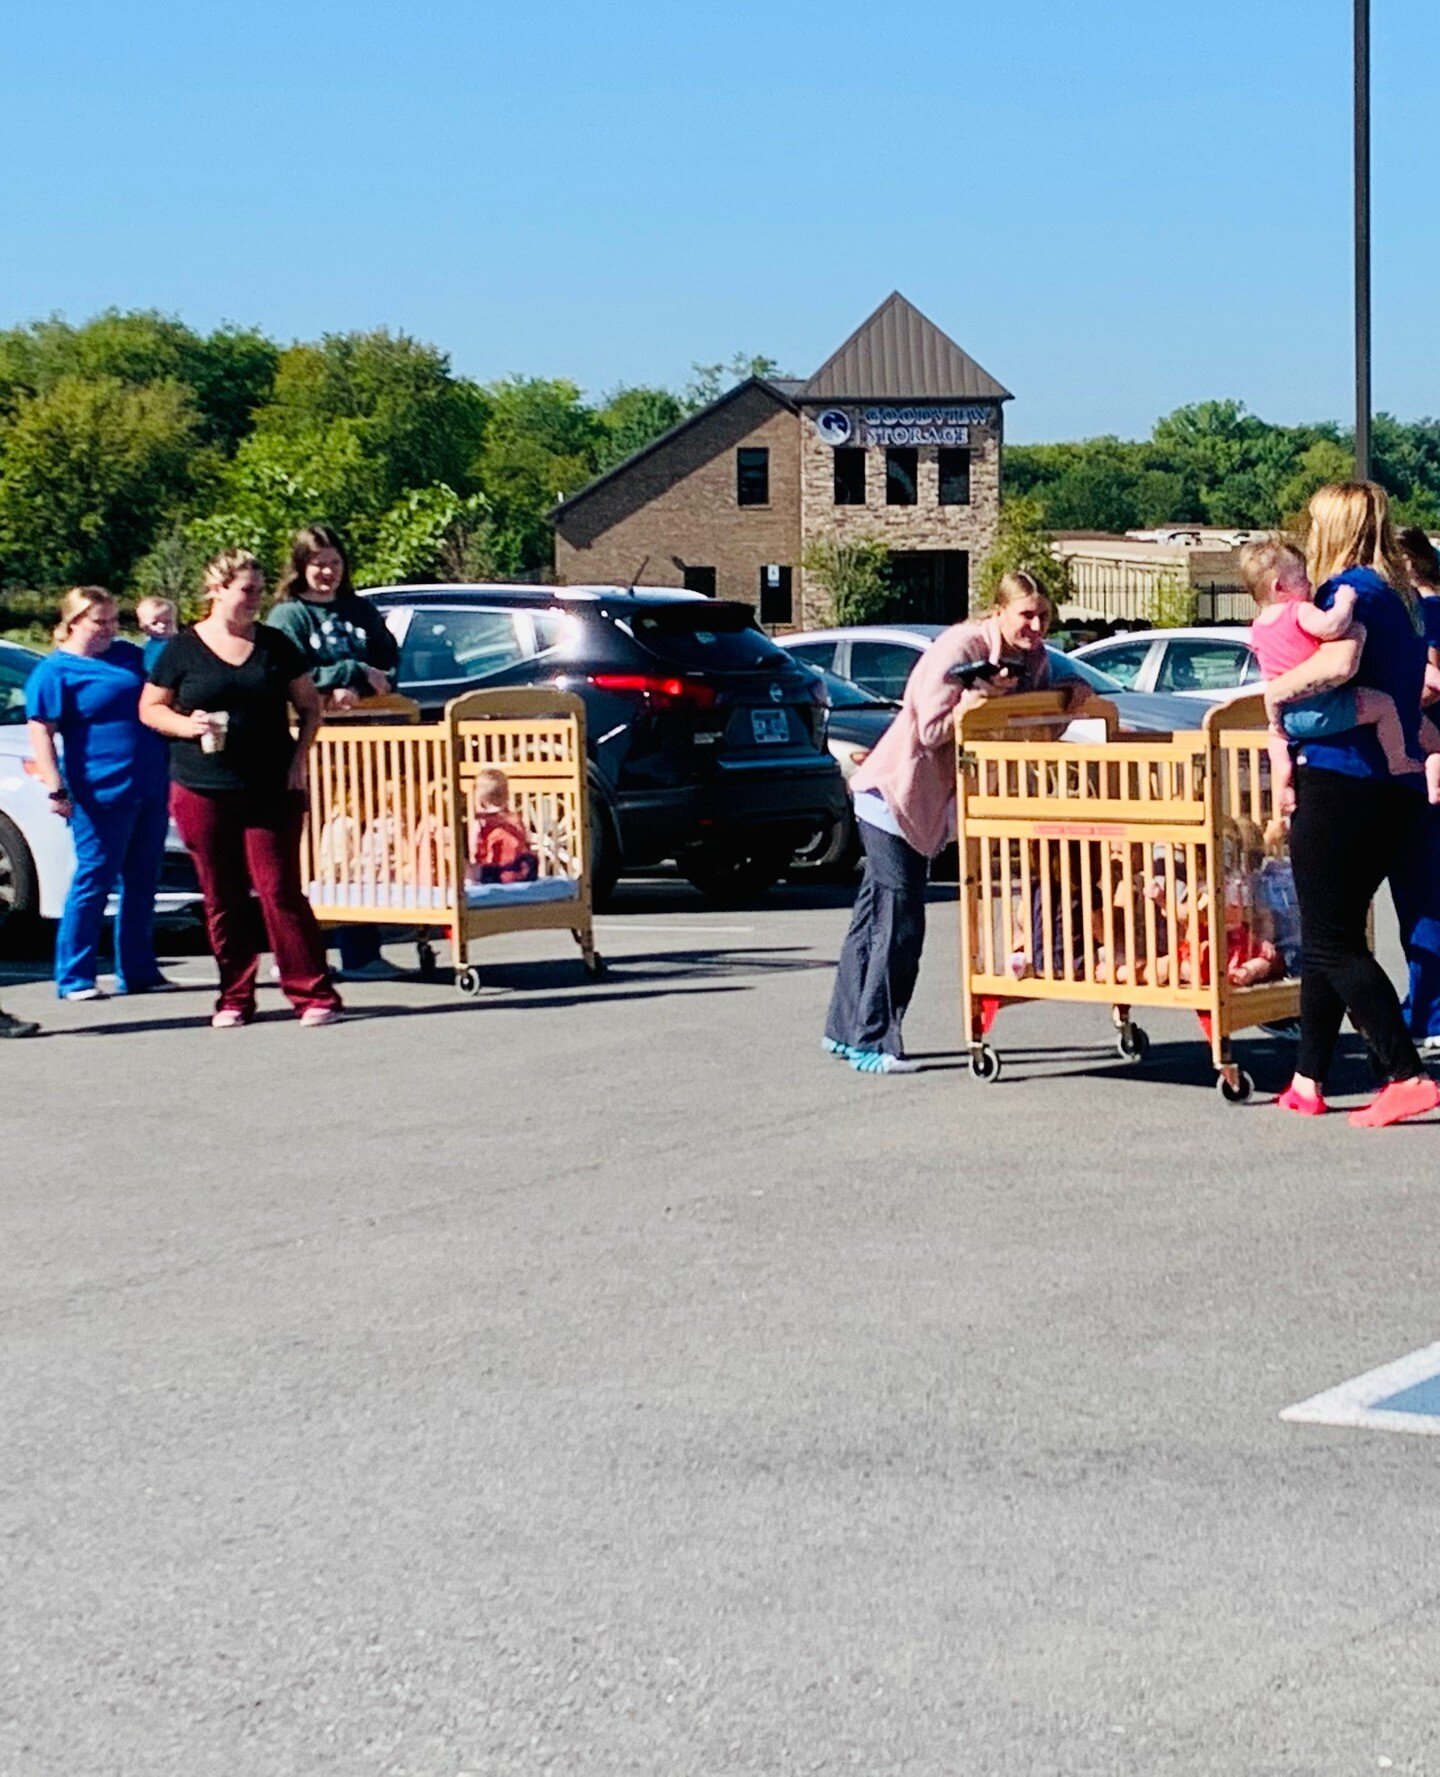 Yesterday we had a fire drill!! Everyone did amazing. ⁠
⁠
Since we do these every month the children aren't afraid when they hear the alarm.  Shout out to our amazing teachers for keeping the children together, safe, AND entertained! ❤️